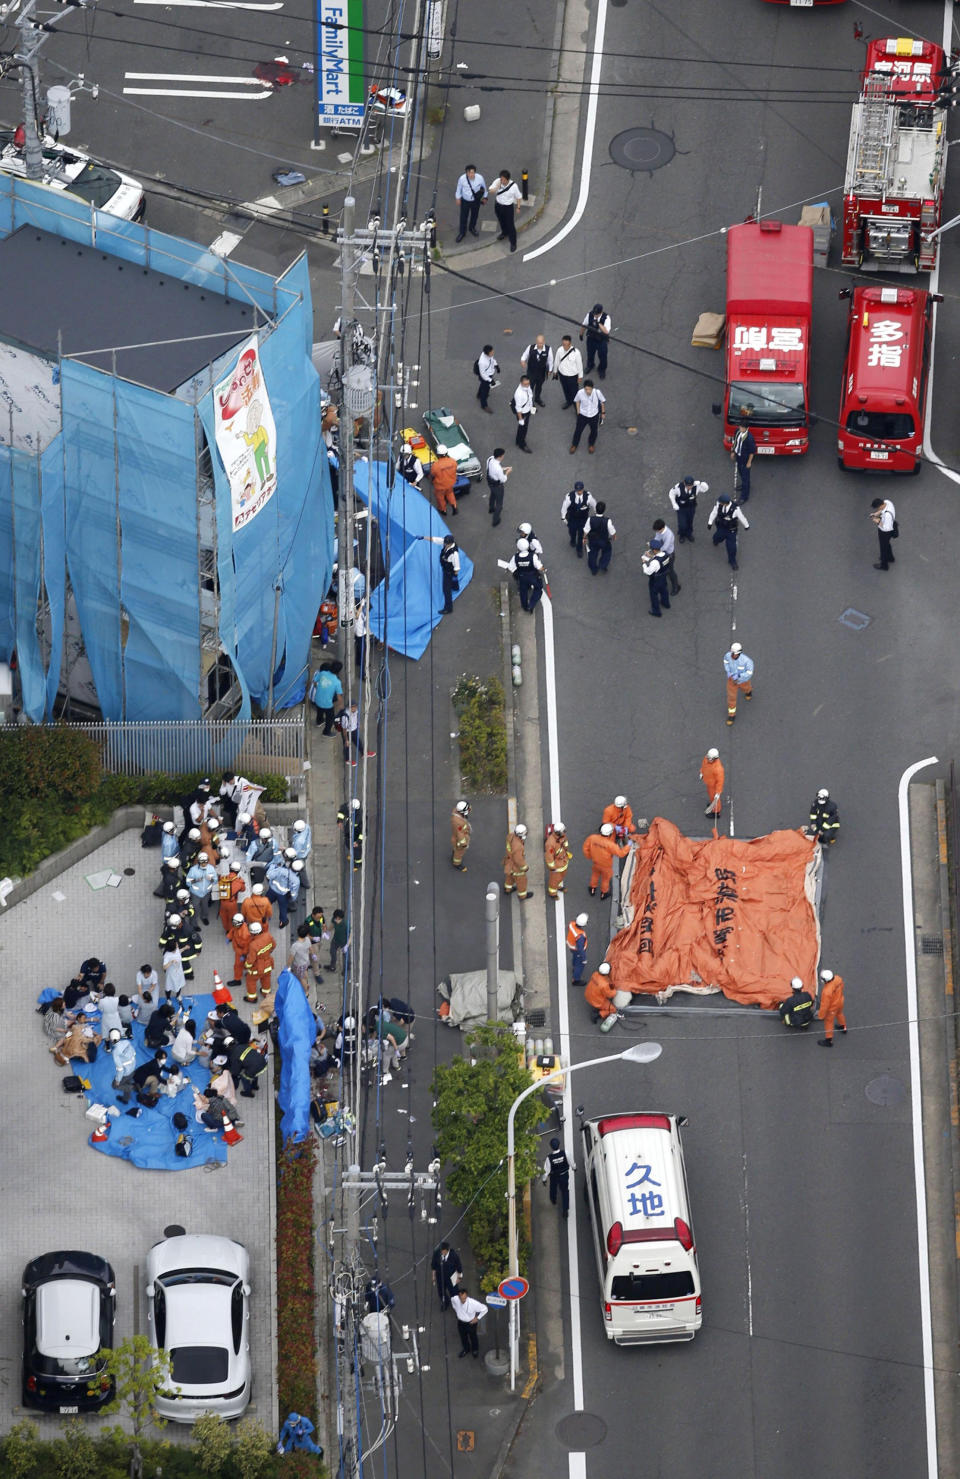 An aerial view shows rescue workers and police officers operate at the site where sixteen people were injured in a suspected stabbing by a man, in Kawasaki.